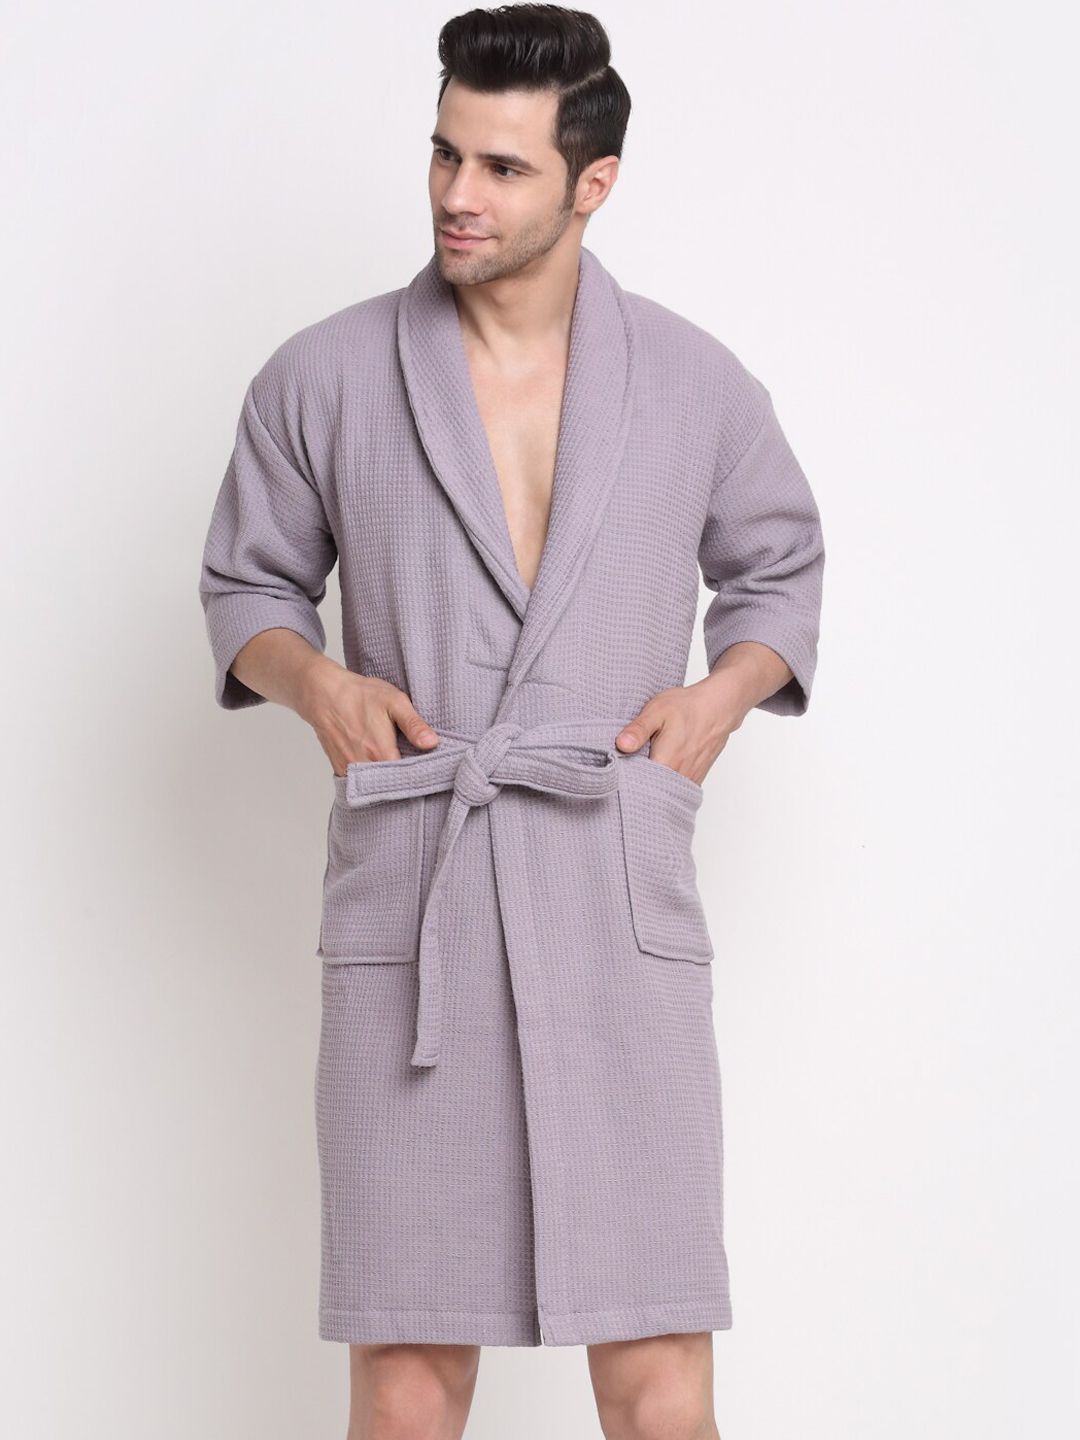 Trident Purple Solid Bath Robe With Belt Price in India